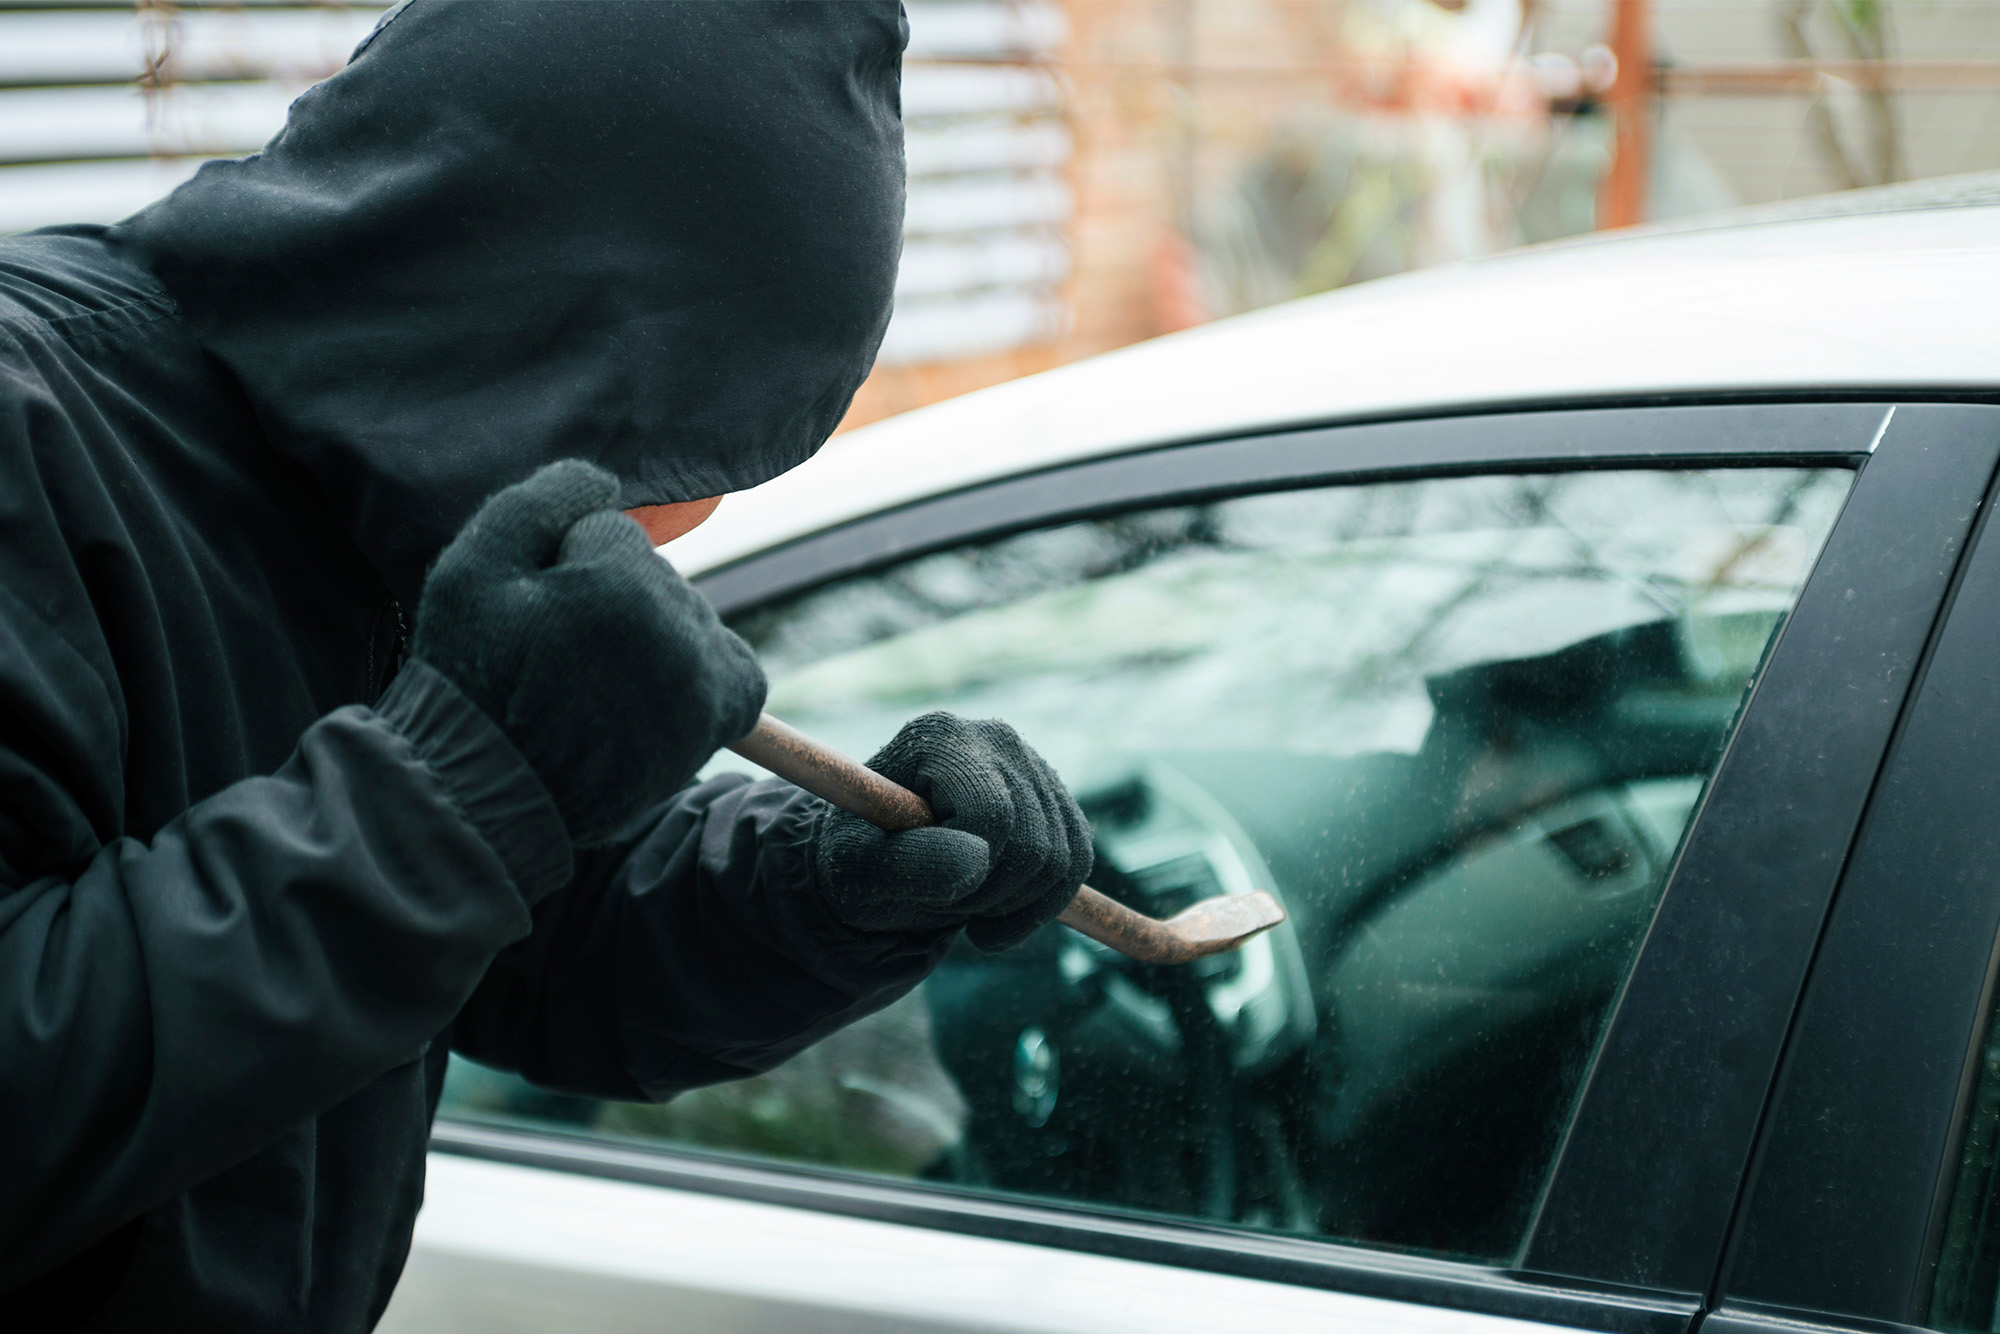 2023 Top Auto Hazards: A thief breaking into a car with a crowbar.